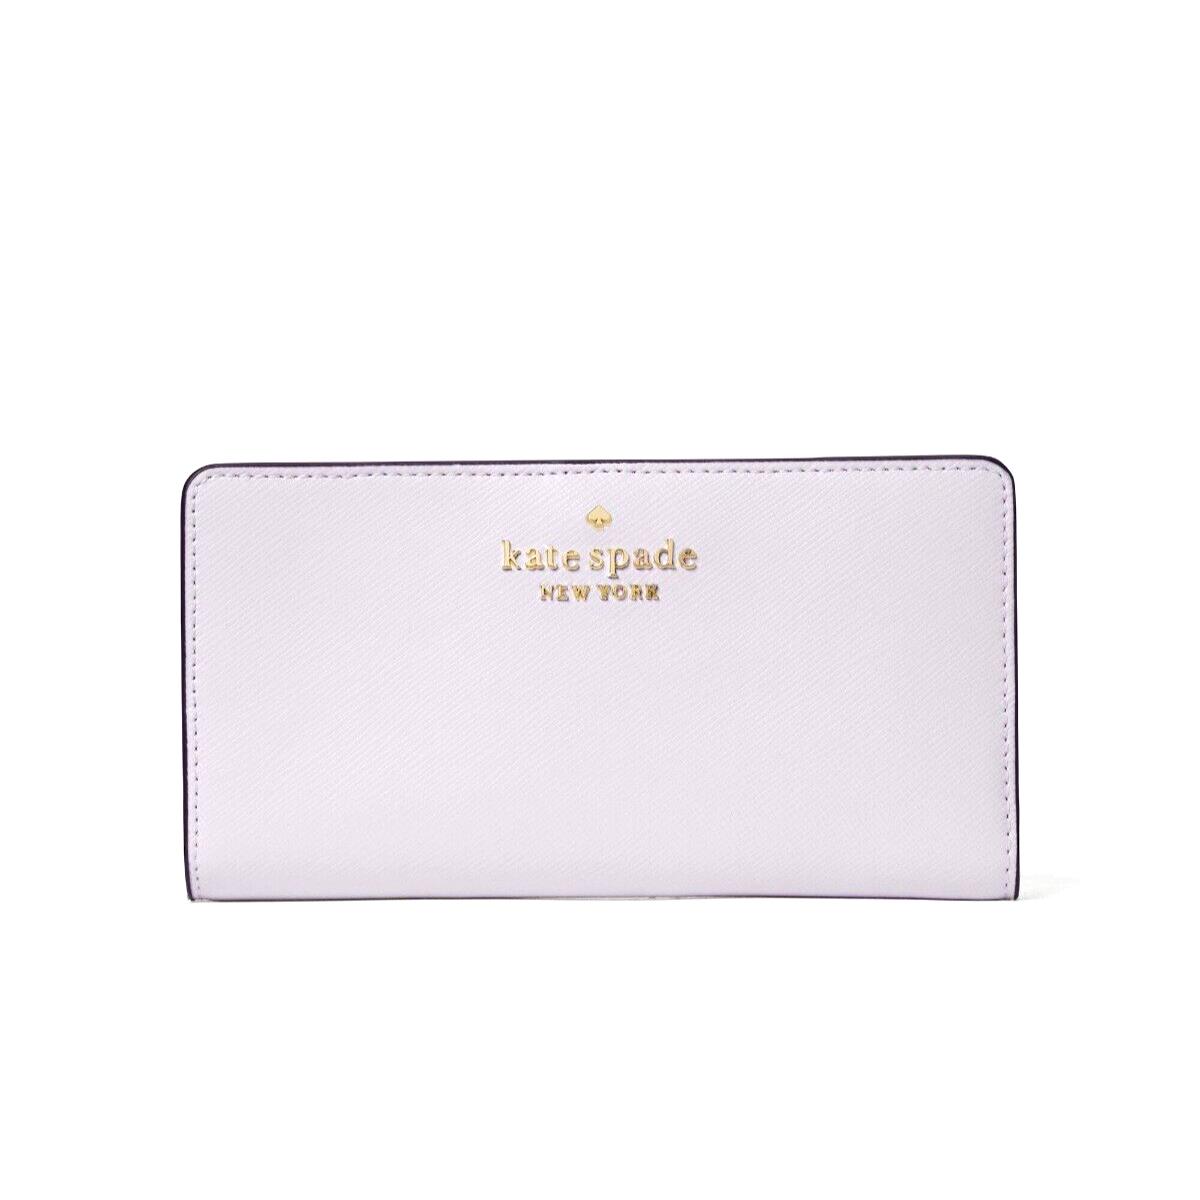 New Kate Spade Staci Large Slim Bifold Wallet Saffiano Leather Lilac ...